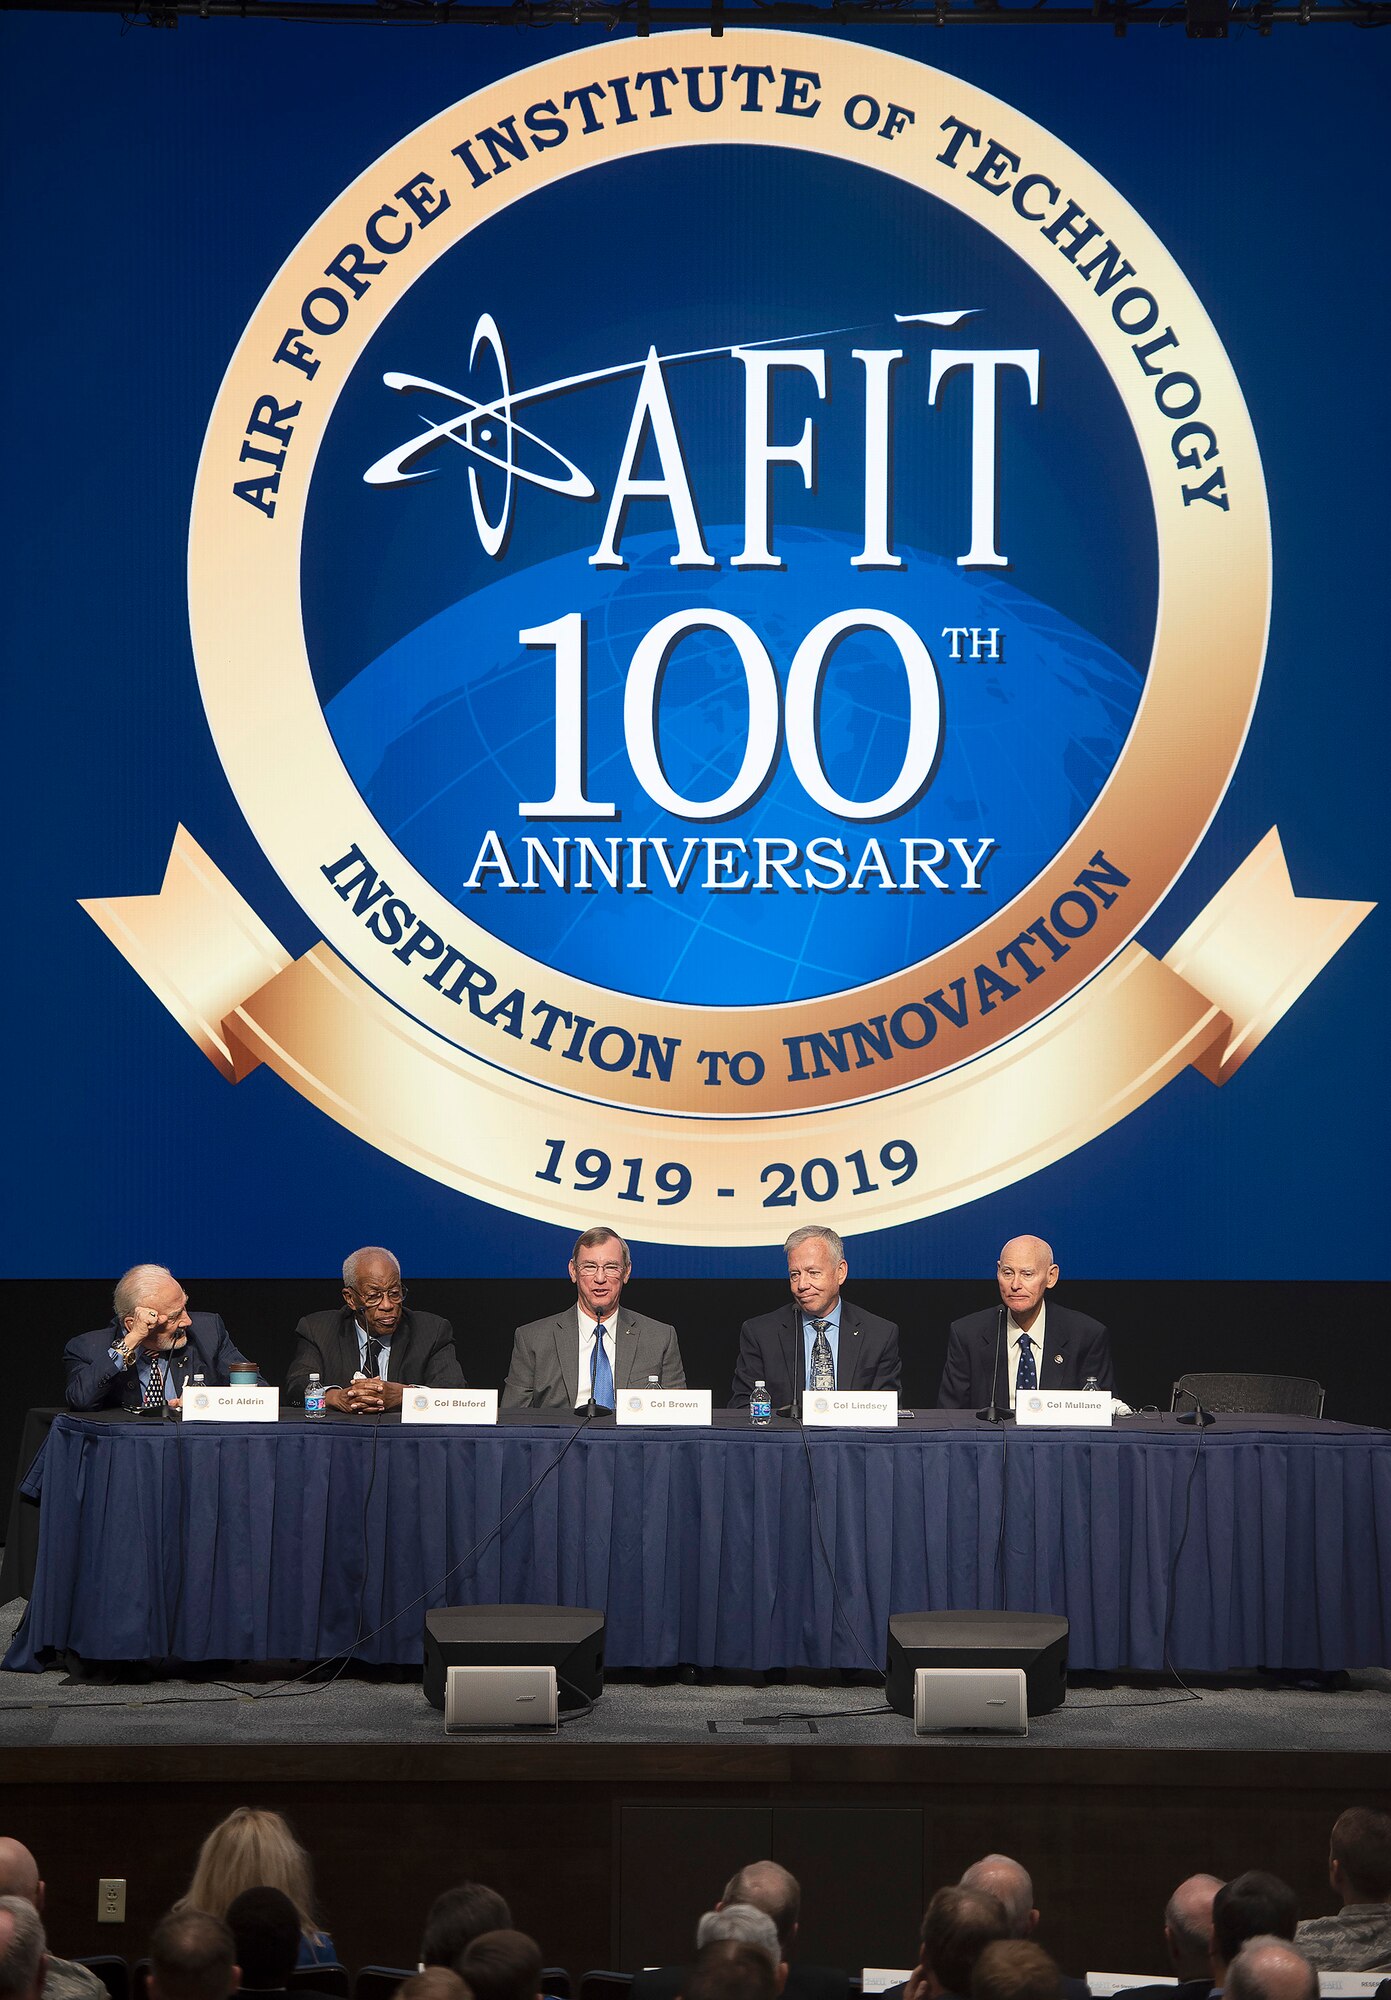 A panel of Air Force Institute of Technology alumni who went on to become astronauts discuss how AFIT impacted their careers and the future of space as part of the AFIT Centennial Symposium on Wright-Patterson Air Force Base, Ohio, Nov. 7, 2019. The panel, which included Buzz Aldrin, the second man on the moon, and Guy Bluford, the first African-American in space, also took questions from the audience of AFIT students. (U.S. Air Force photo by R.J. Oriez)